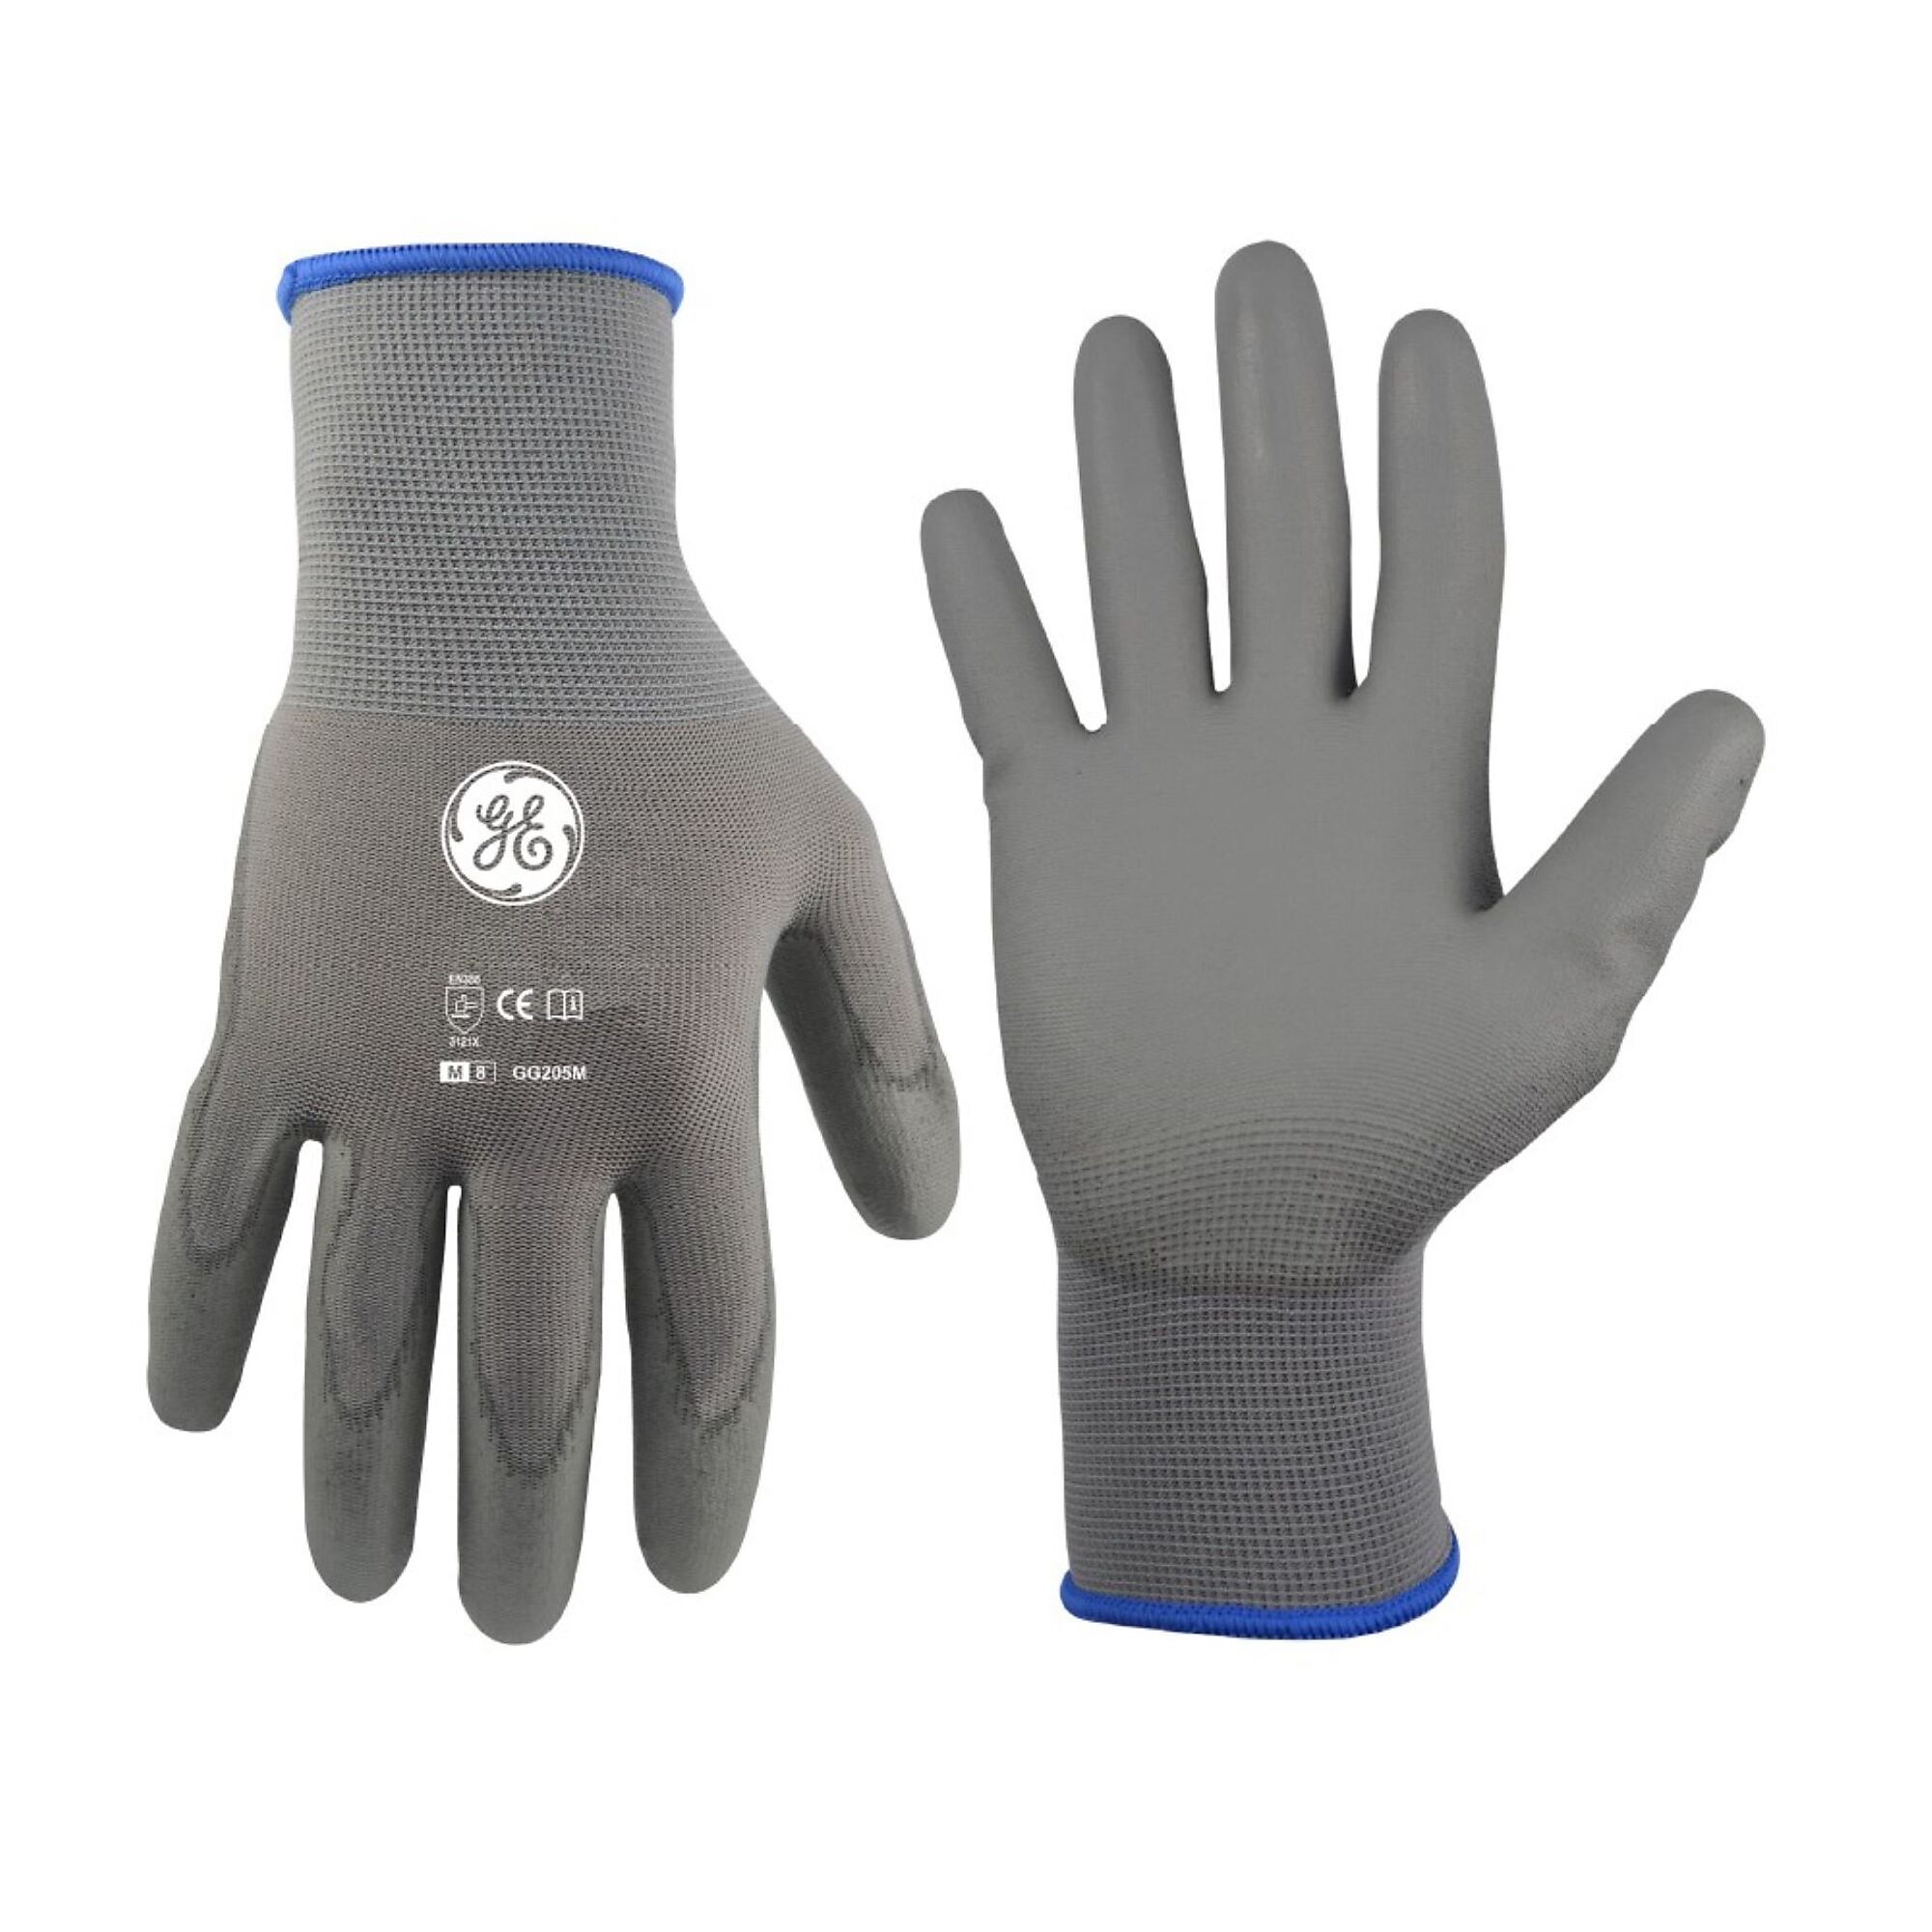 General Electric, Unisex Dipped Gloves Gray M 12 pair, Size M, Included (qty.) 12, Model GG205M